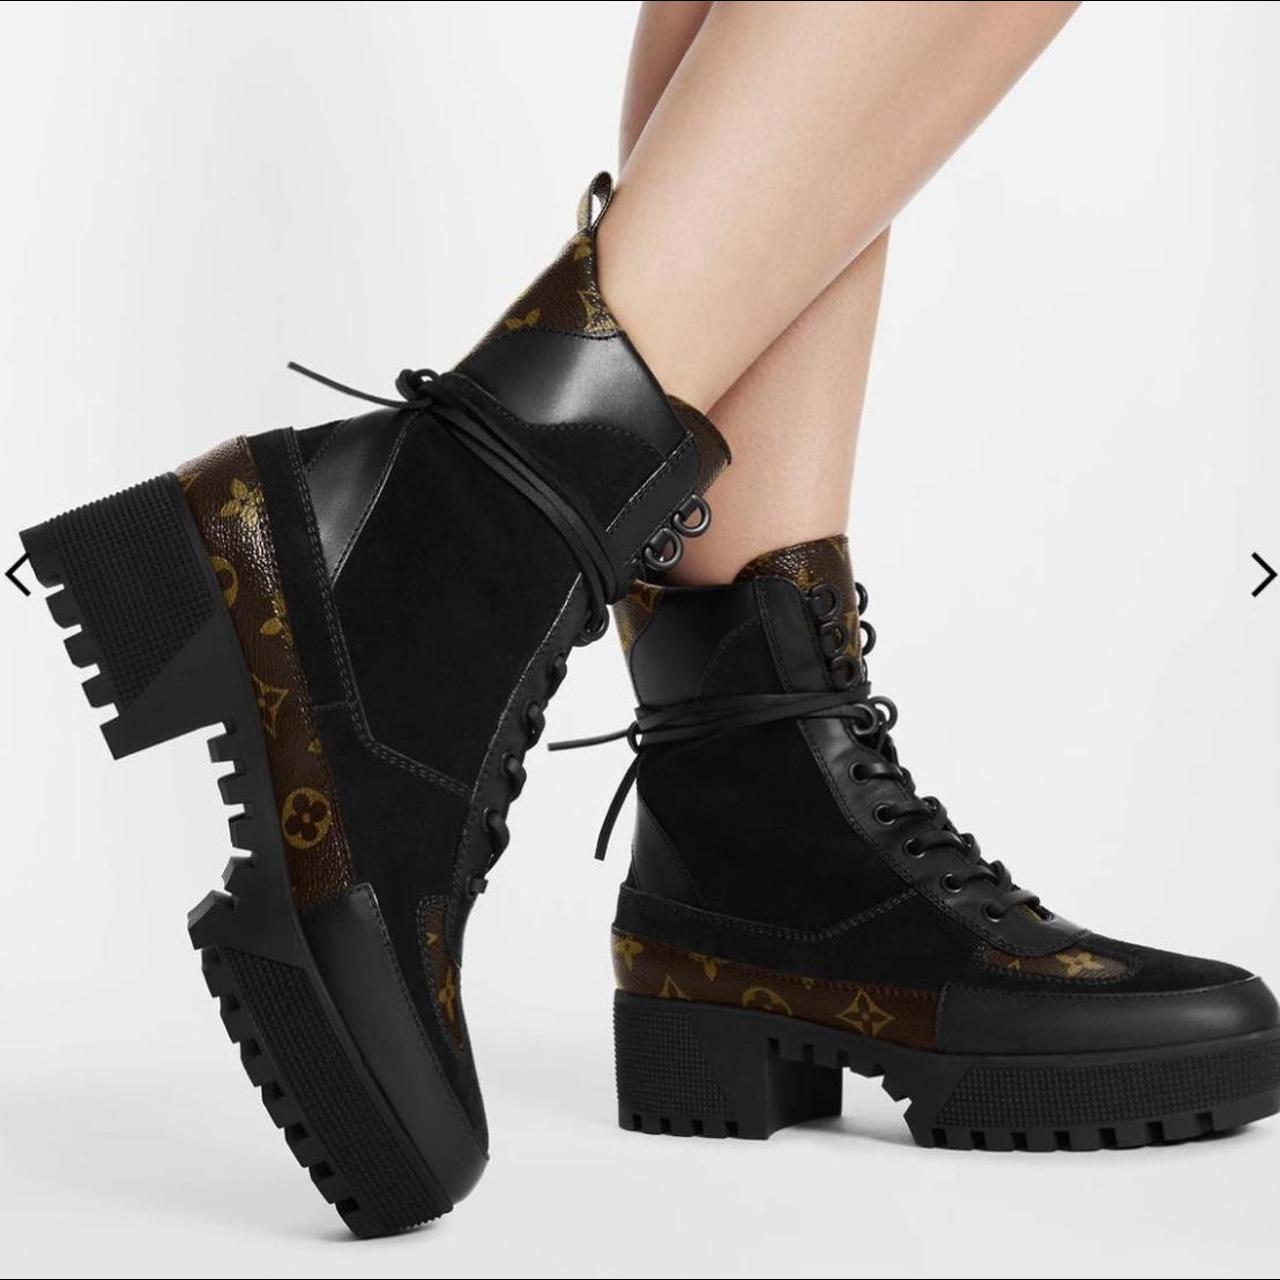 Hard Leather Louis Vuitton Combat Boots Boots are - Depop